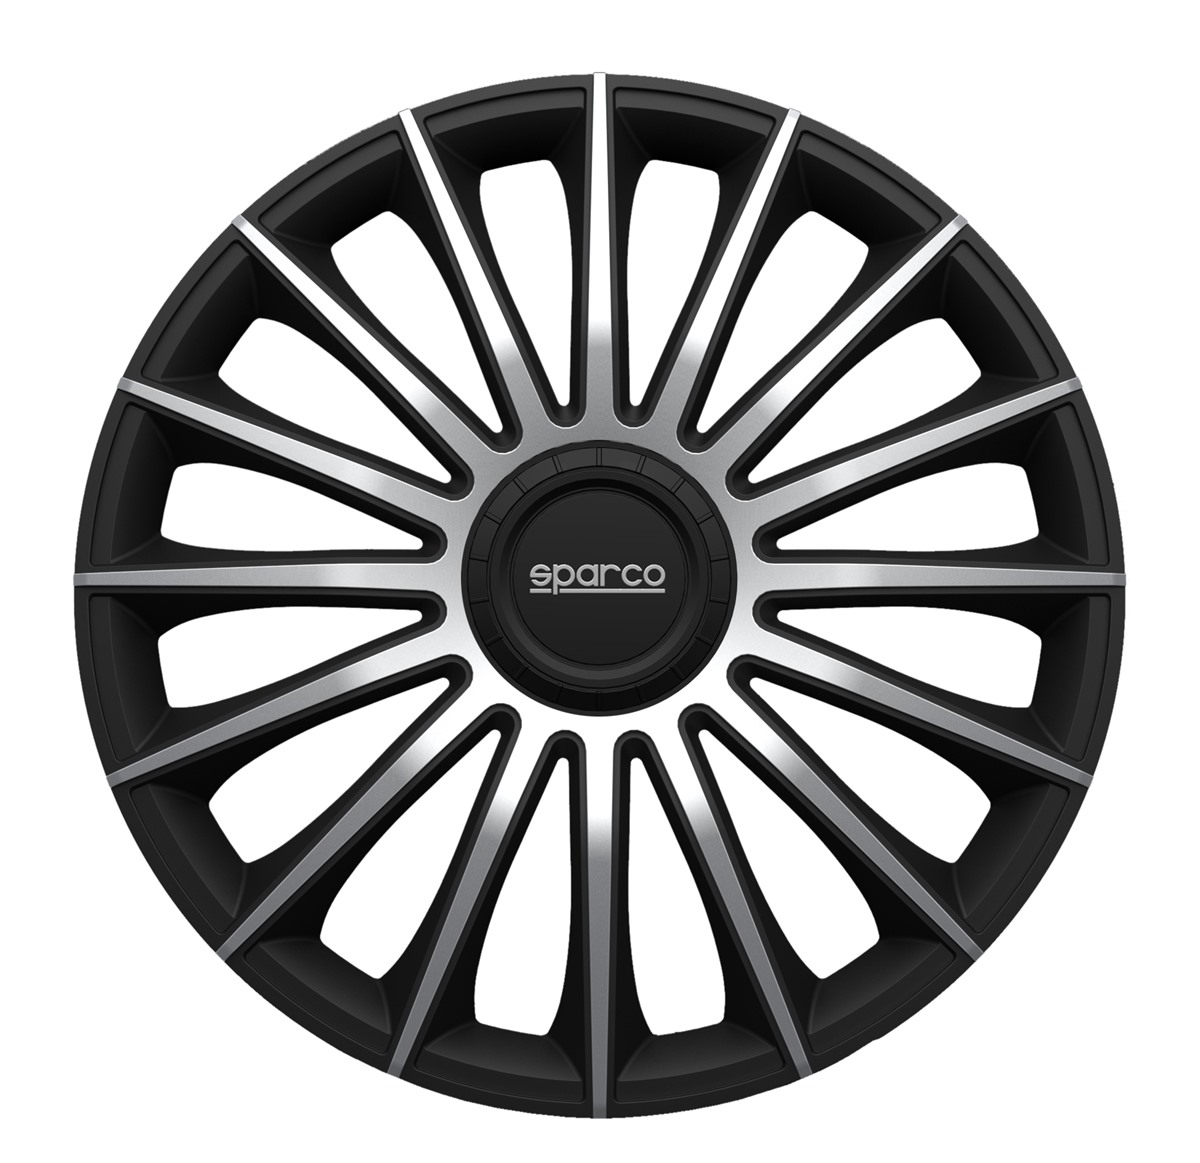 Wheel covers Treviso 15 black-silver 4pcs Sparco